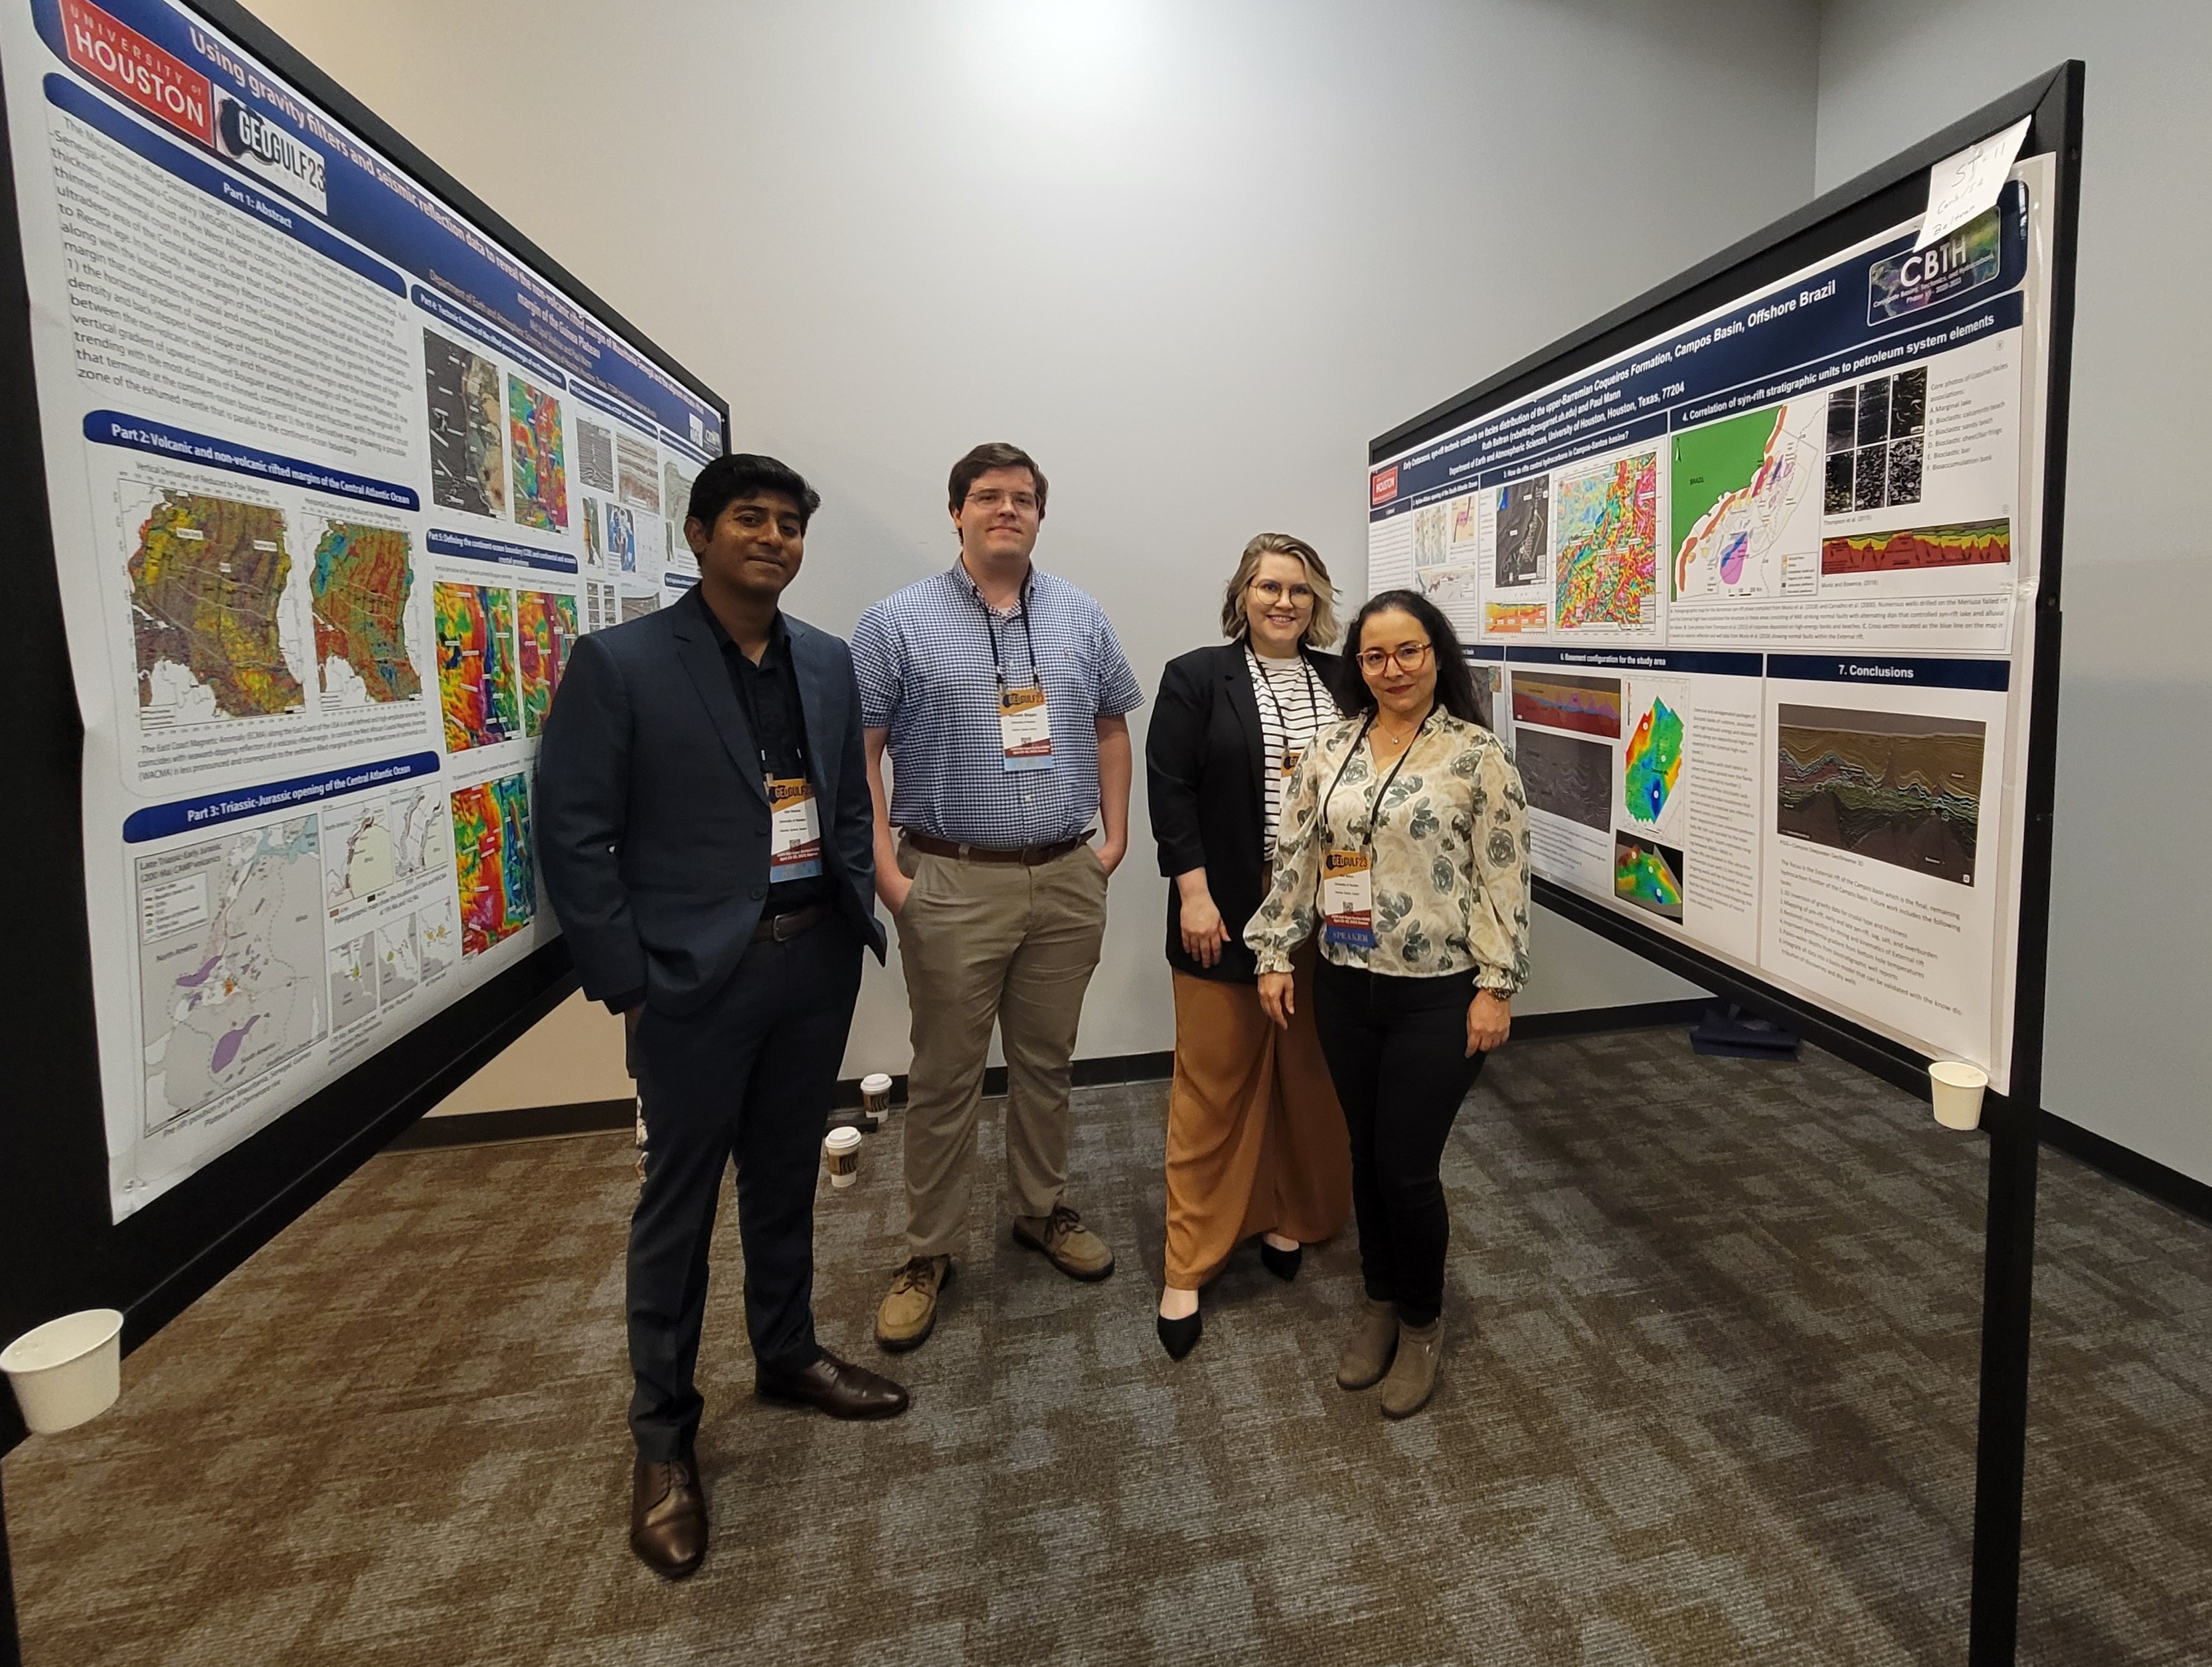 CBTH students Upal Shahriar, Kenneth Shipper, Daniella Easley, and Ruth Beltran (from L to R) present at GeoGulf23